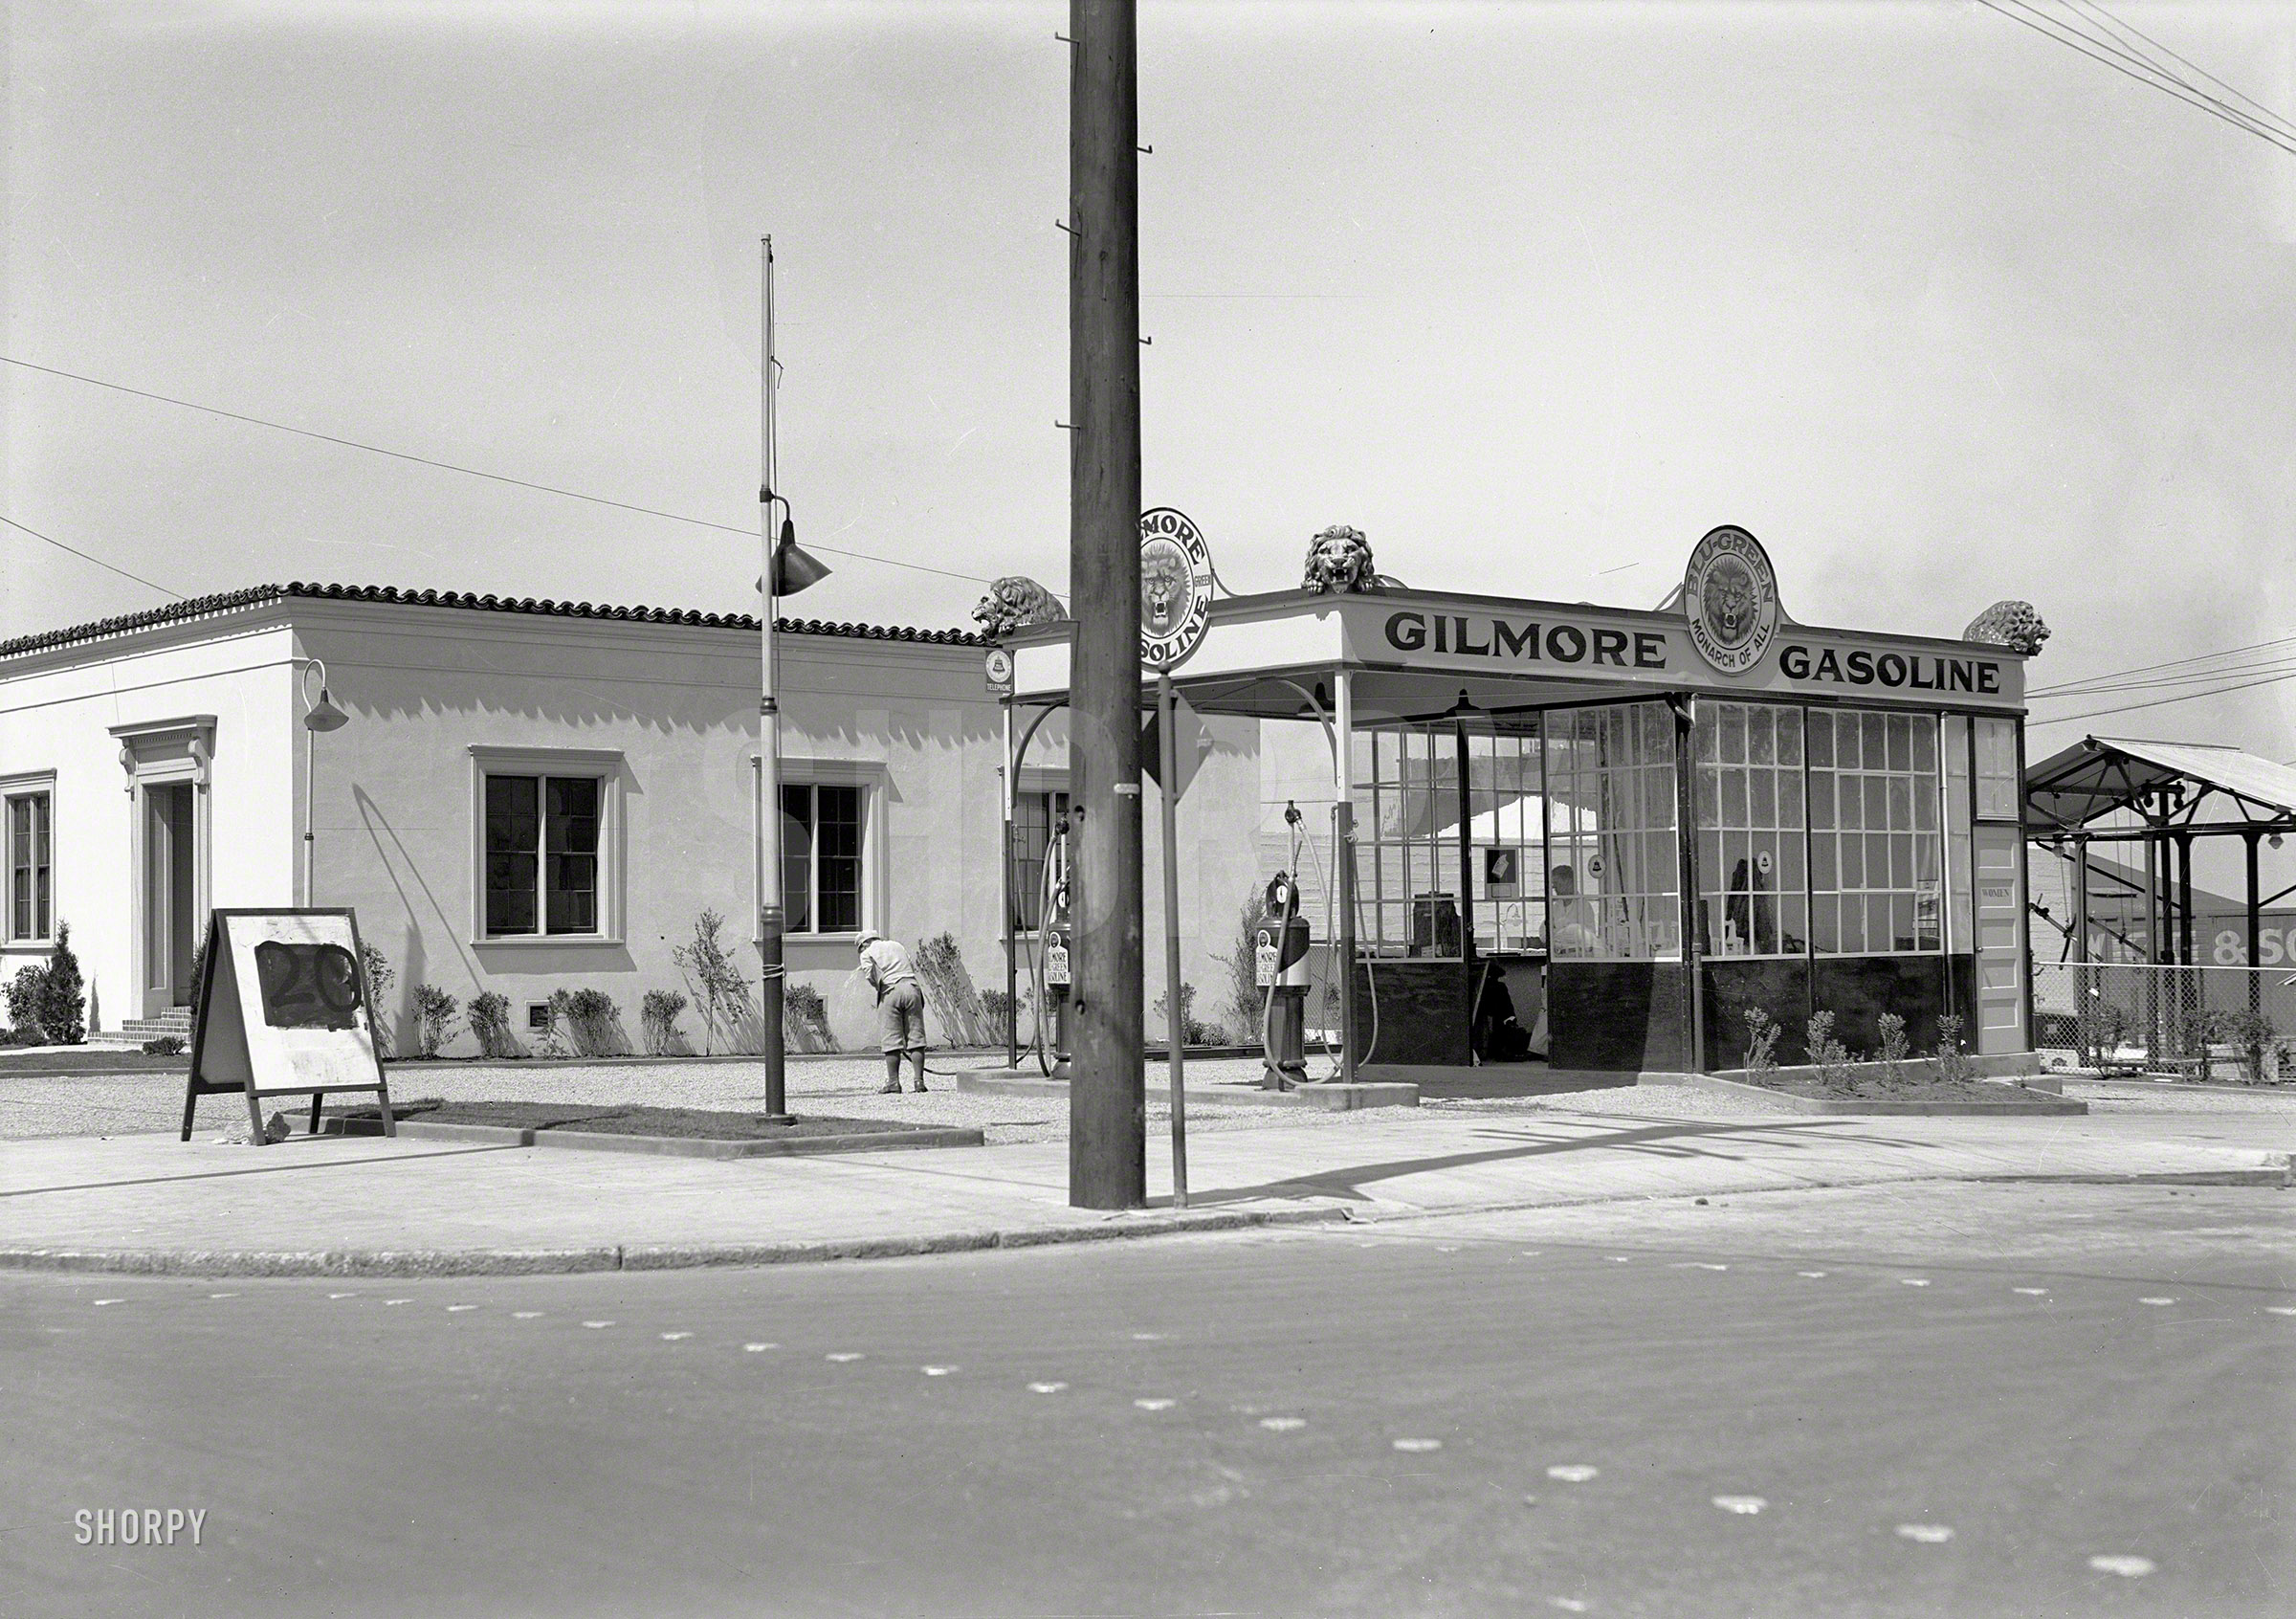 1920s San Francisco. "Gilmore Gasoline service station." Where you can fill up with gas or water. Who can tell us where this is? 5x7 glassneg. View full size.